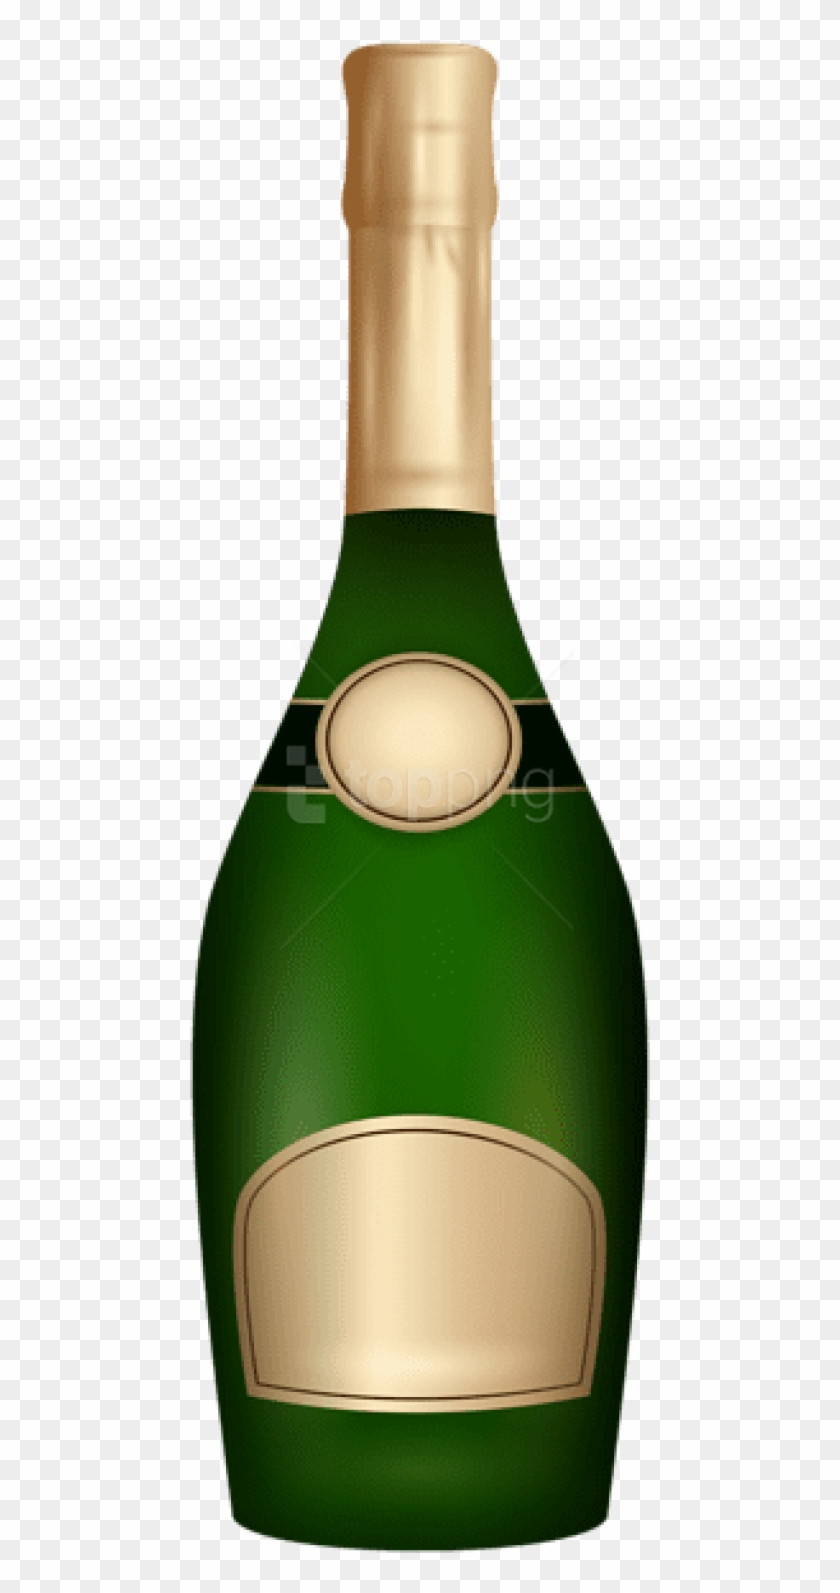 Download Free Png Download Champagne Bottle Png Images Background Transparent Png 480x1532 1852085 Pngfind